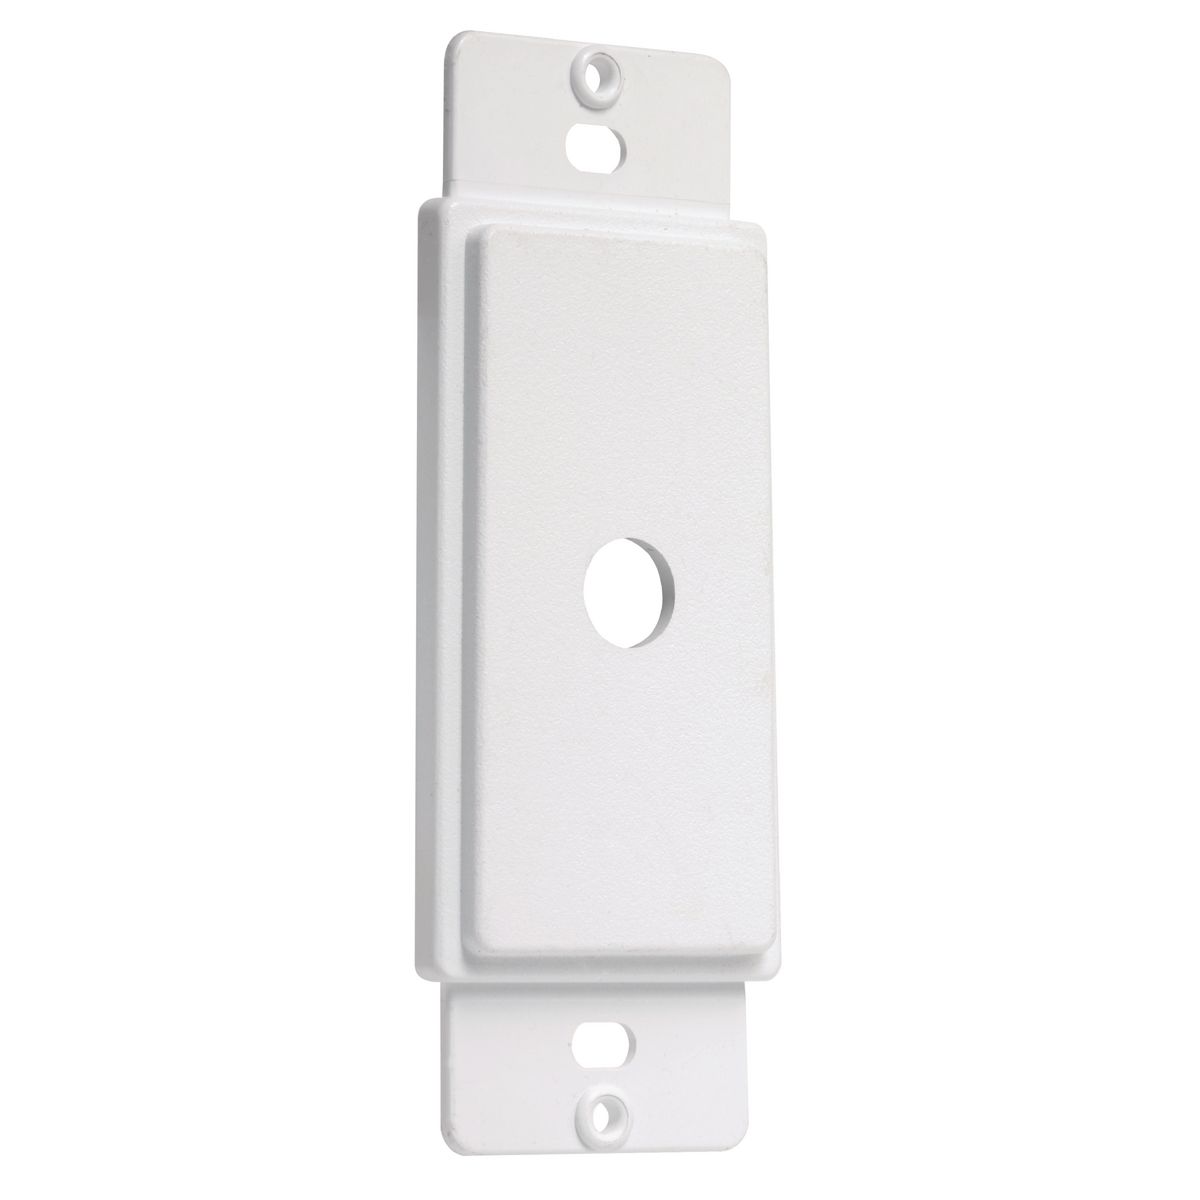 MASQUE 5000 DIMMER ADAPTER PLATE WHITE